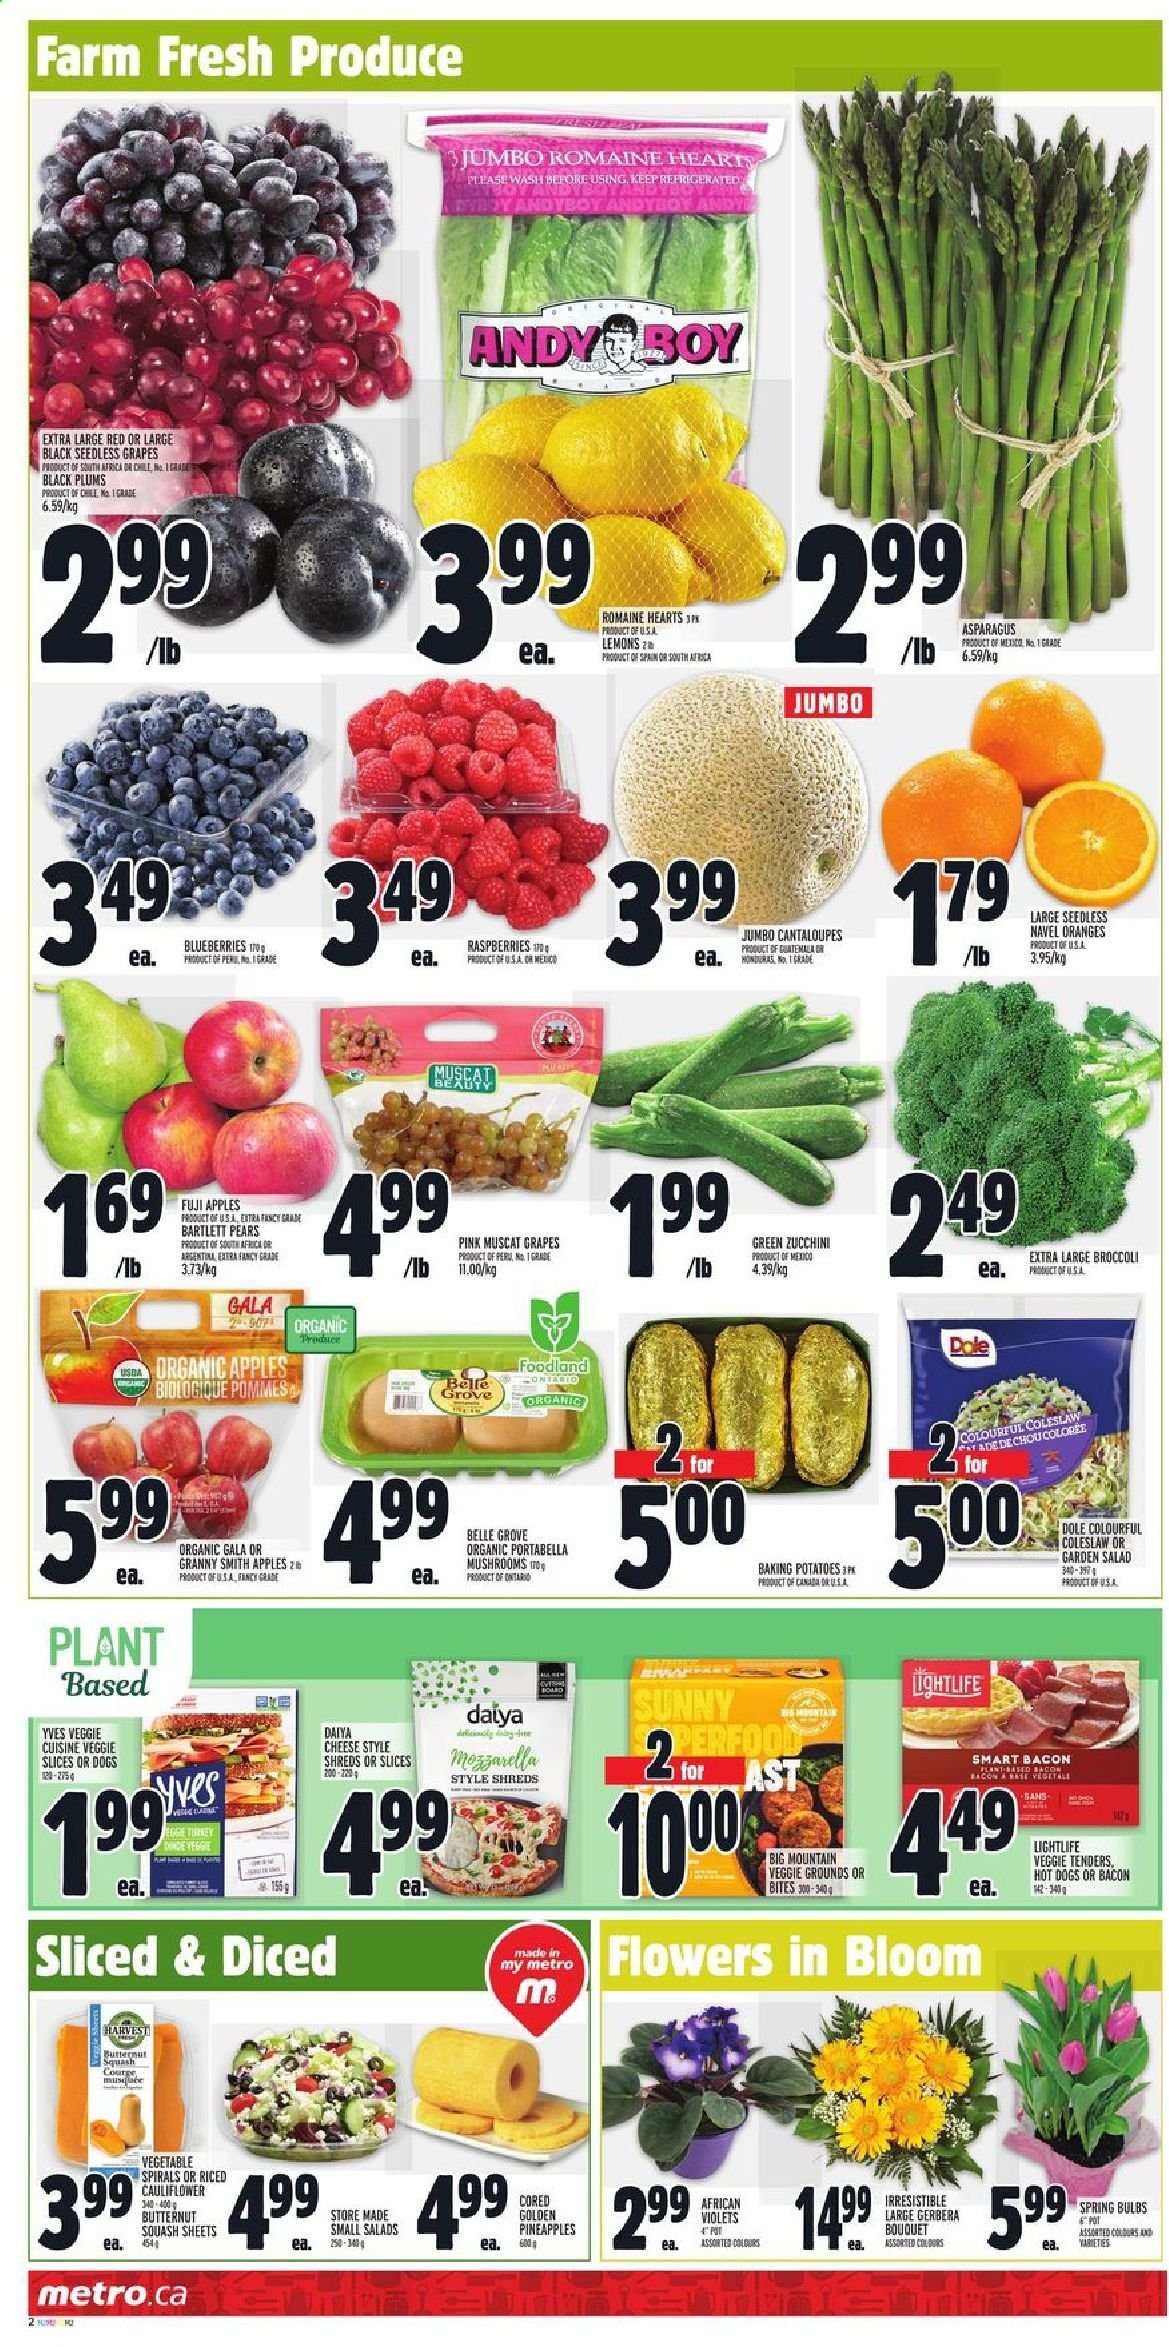 thumbnail - Metro Flyer - April 08, 2021 - April 14, 2021 - Sales products - mushrooms, asparagus, broccoli, butternut squash, cantaloupe, zucchini, potatoes, salad, Dole, apples, Bartlett pears, blueberries, Gala, grapes, seedless grapes, pineapple, plums, pears, Fuji apple, lemons, black plums, Granny Smith, navel oranges, coleslaw, hot dog, bacon, cheese, brie, bouquet, gerbera. Page 2.